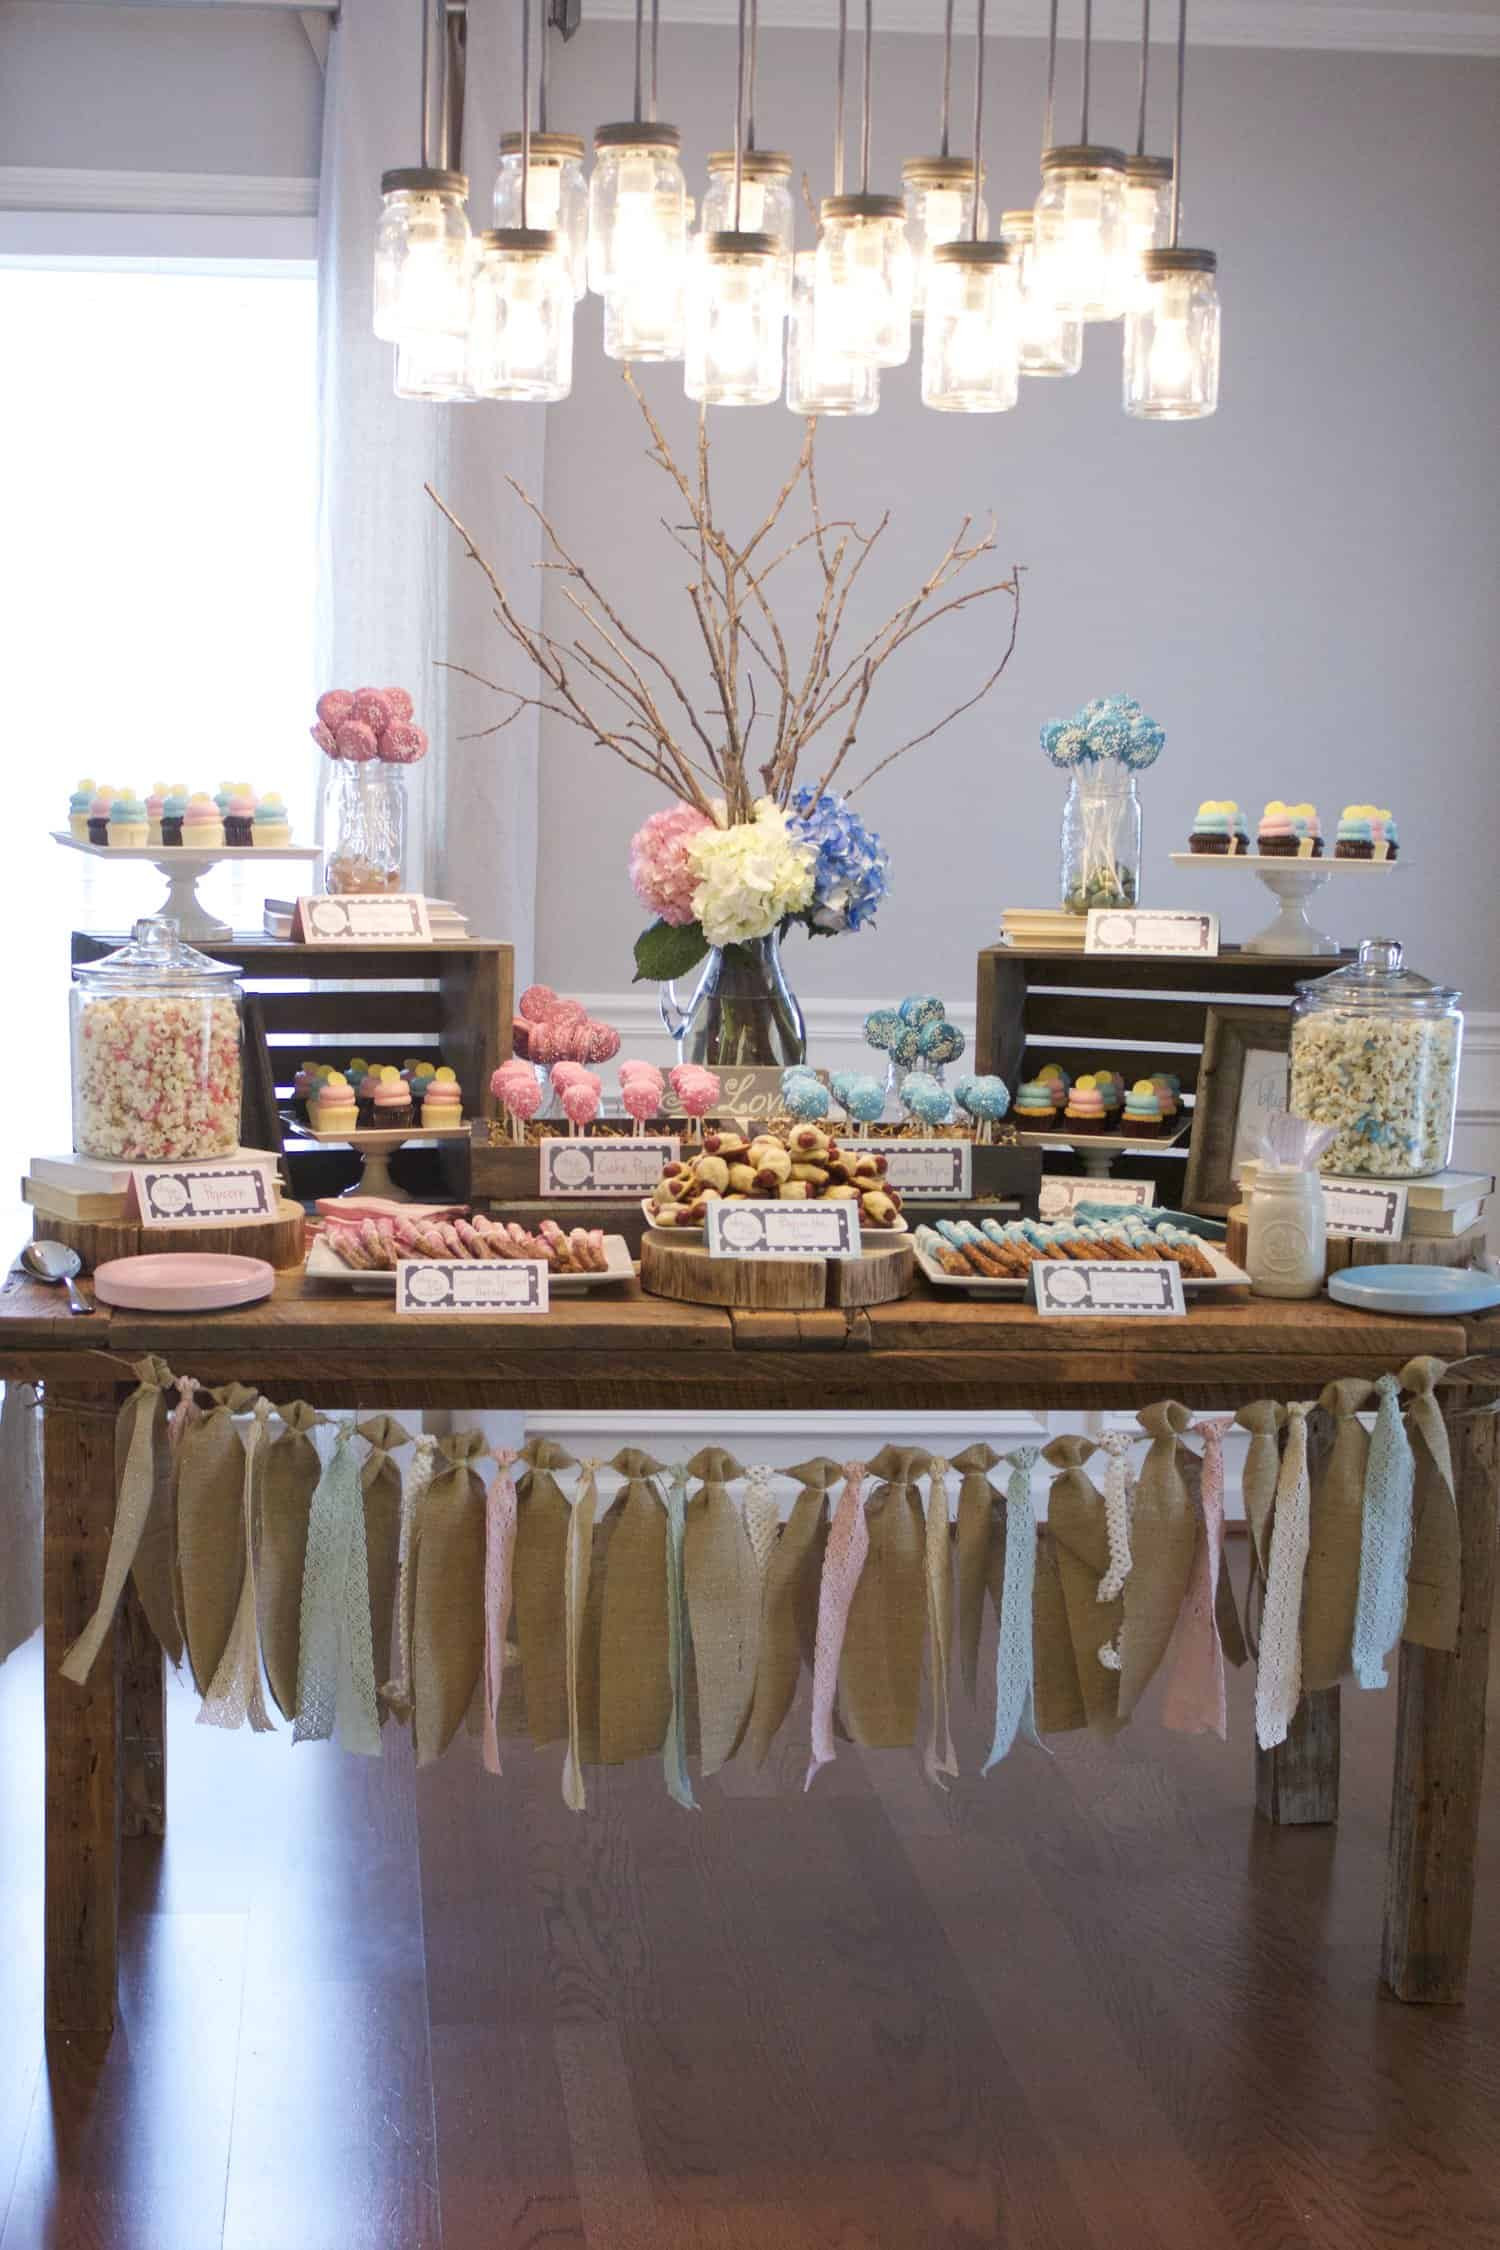 Gender Reveal Theme Party Ideas
 17 Tips To Throw An Unfor table Gender Reveal Party